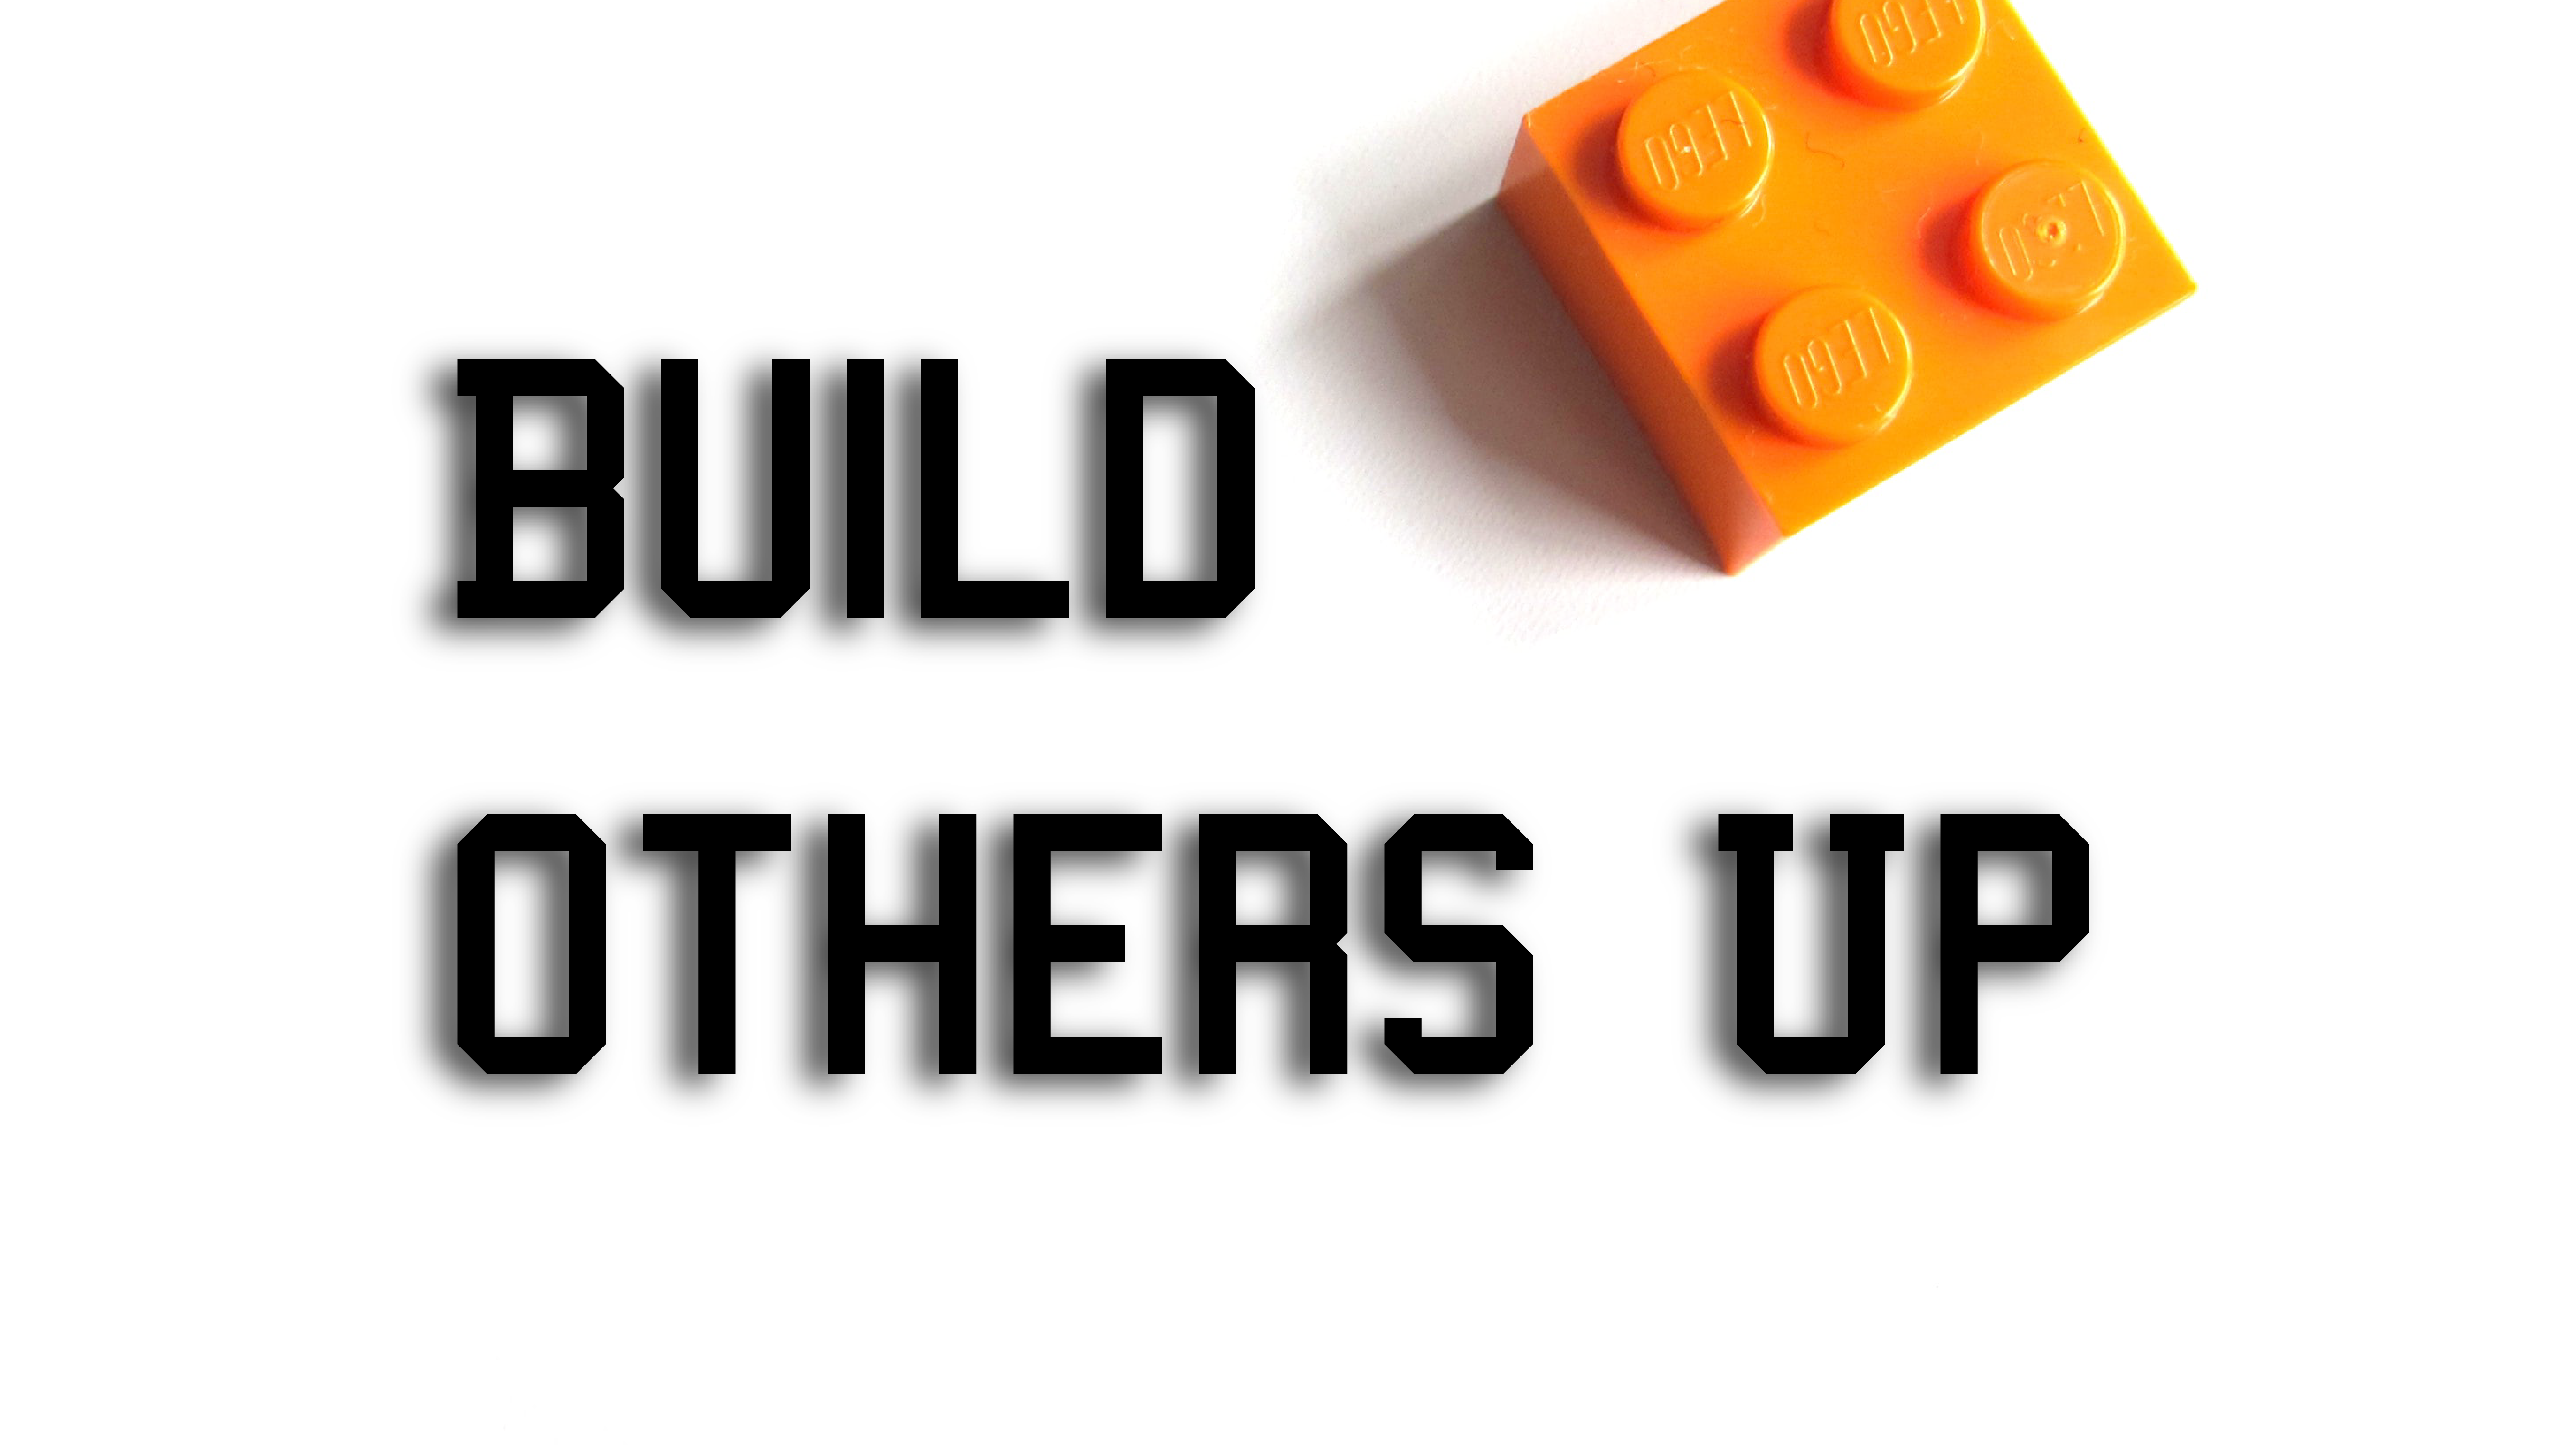 Single lego block on white background with words 'build others up'